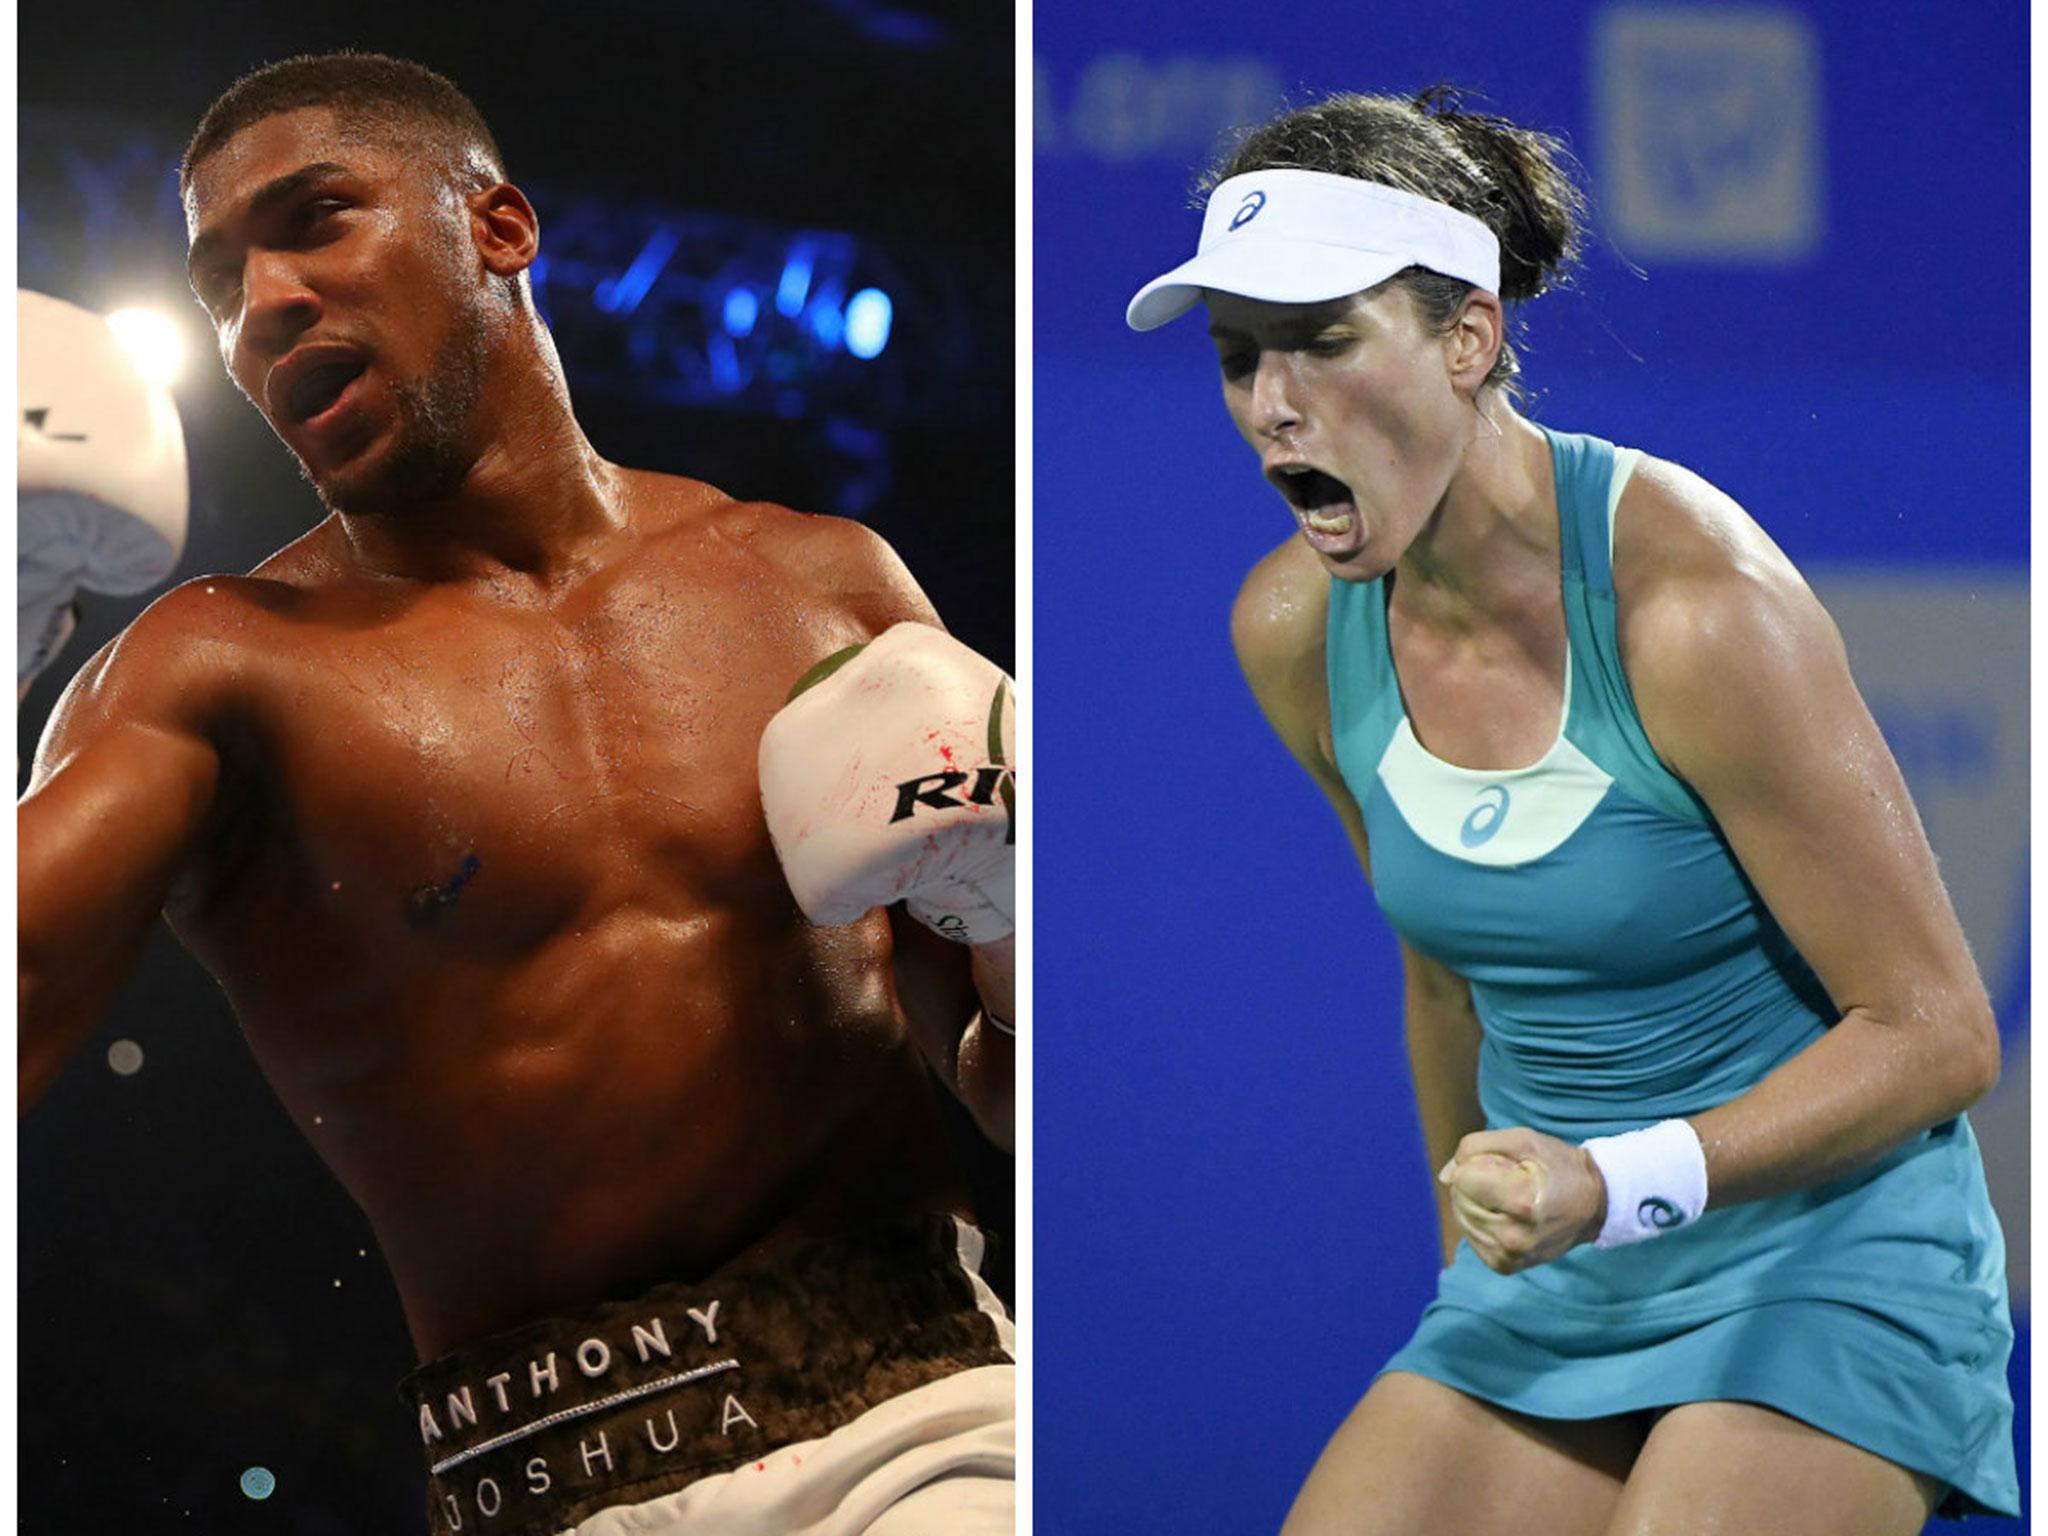 Anthony Joshua and Johanna Konta have both enjoyed a successful year in their respective sports